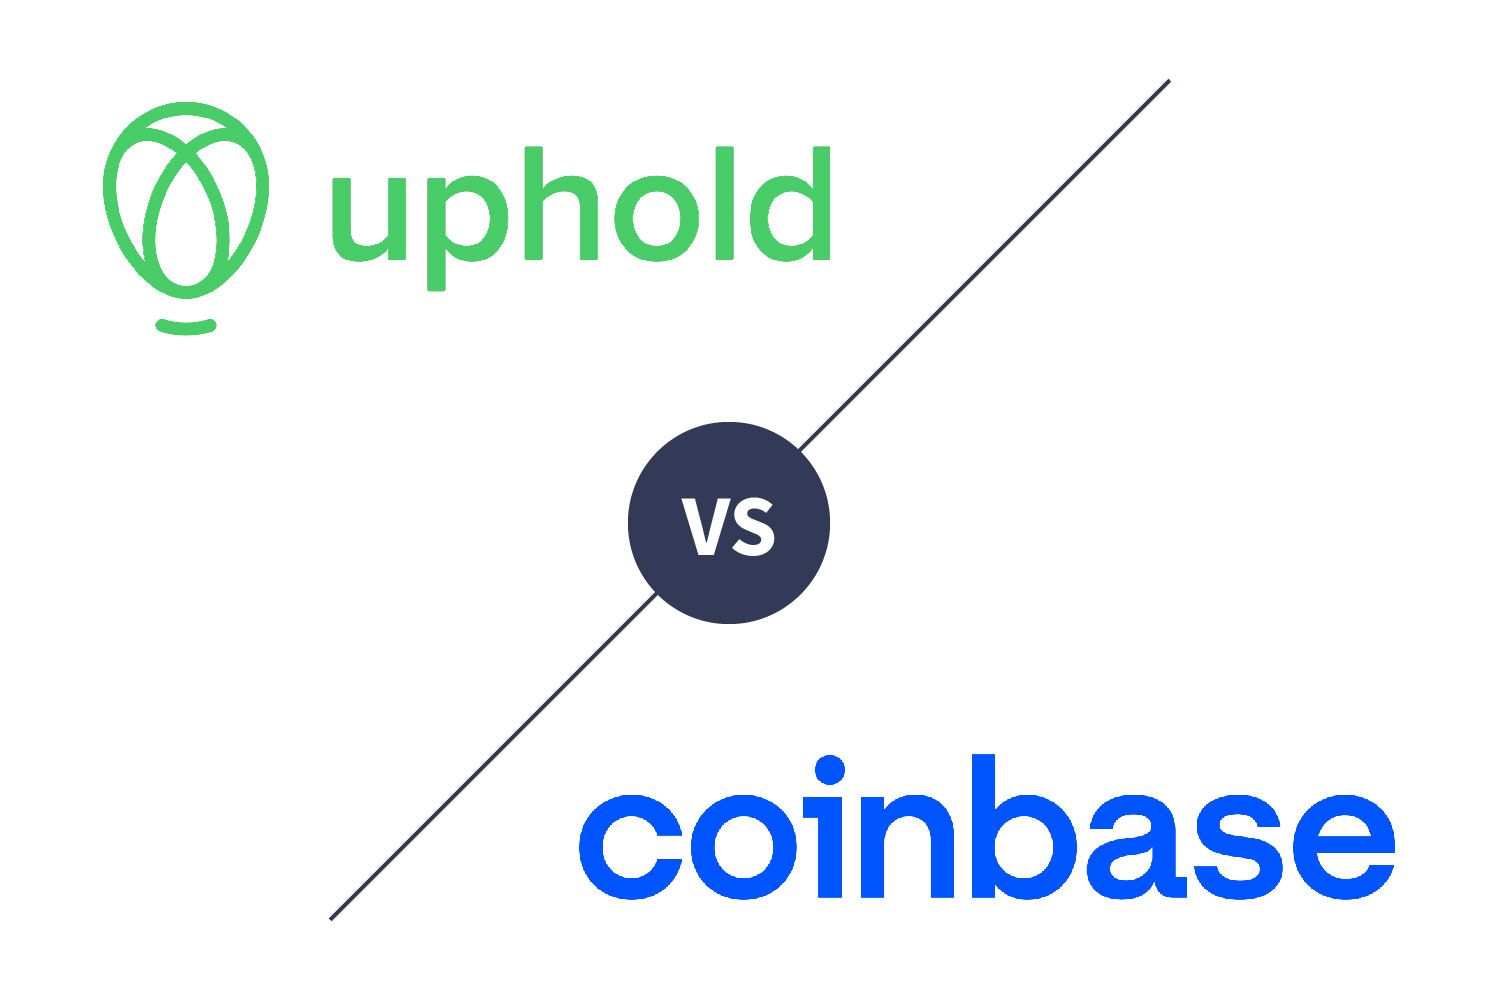 family-gadgets.ru vs. Coinbase: Which Should You Choose?